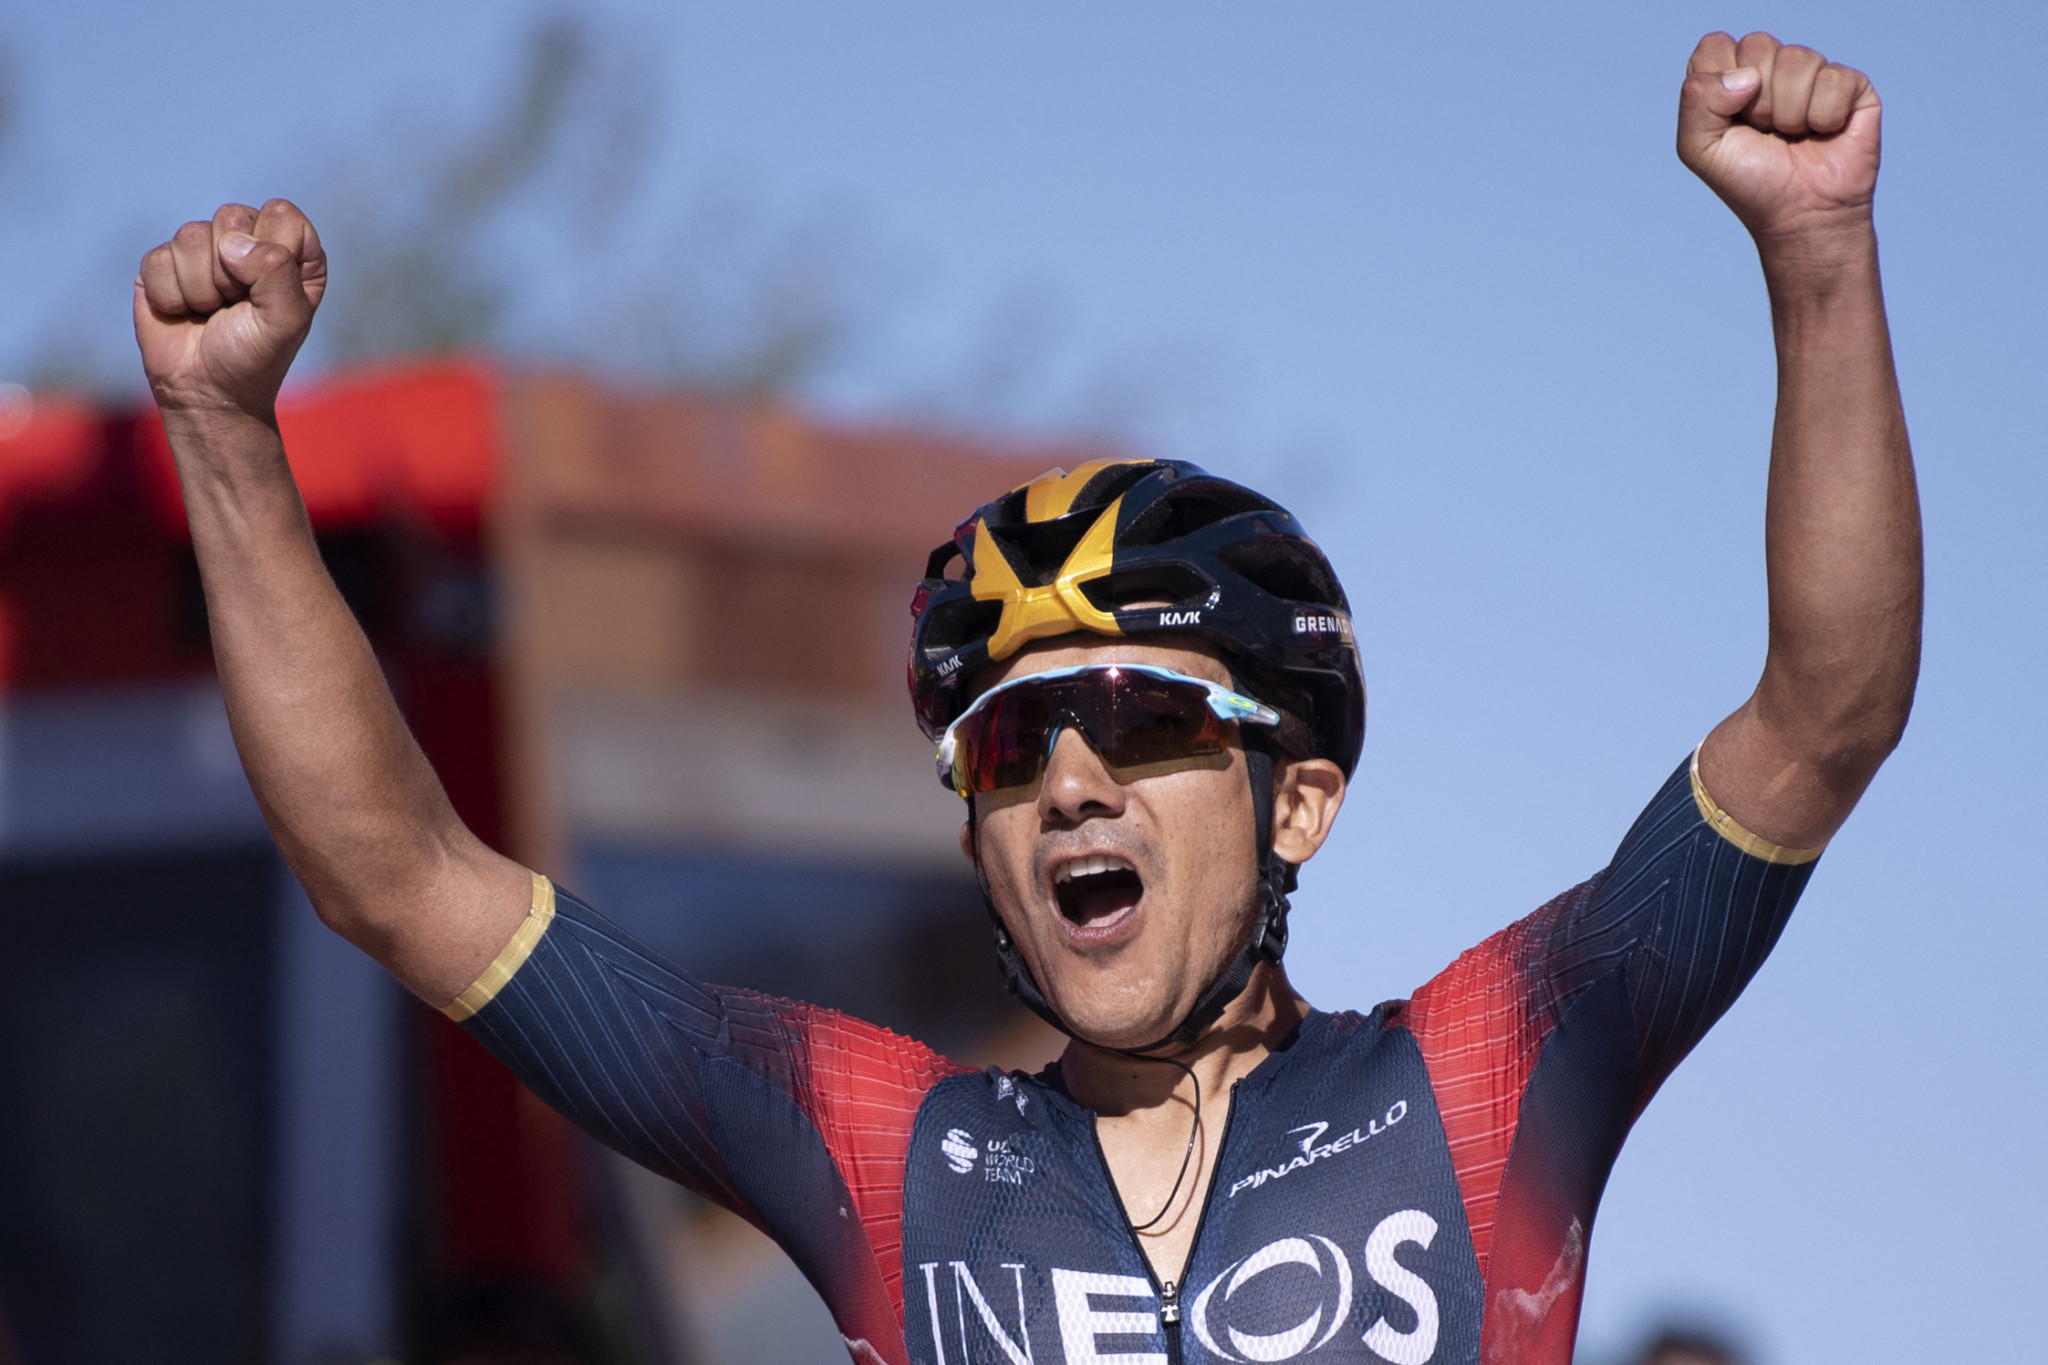 Richard Carapaz claimed his second stage victory in three days at the Vuelta a España ©Getty Images